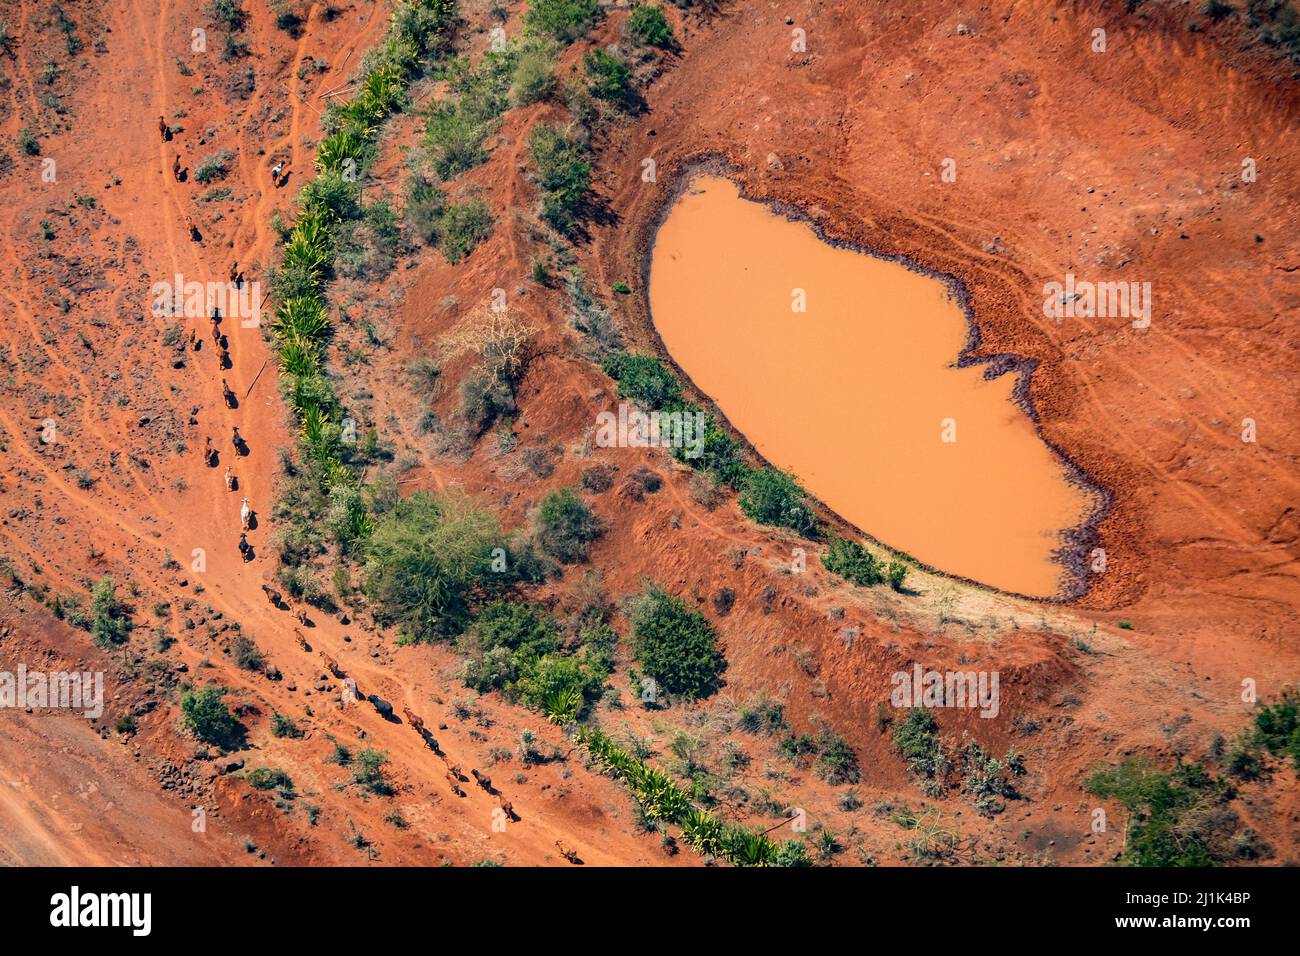 Fantastic and stunning aerial view of a herd of cattle trudging in single file past an orange colored watering hole in the xeric savannah of Kenya Stock Photo